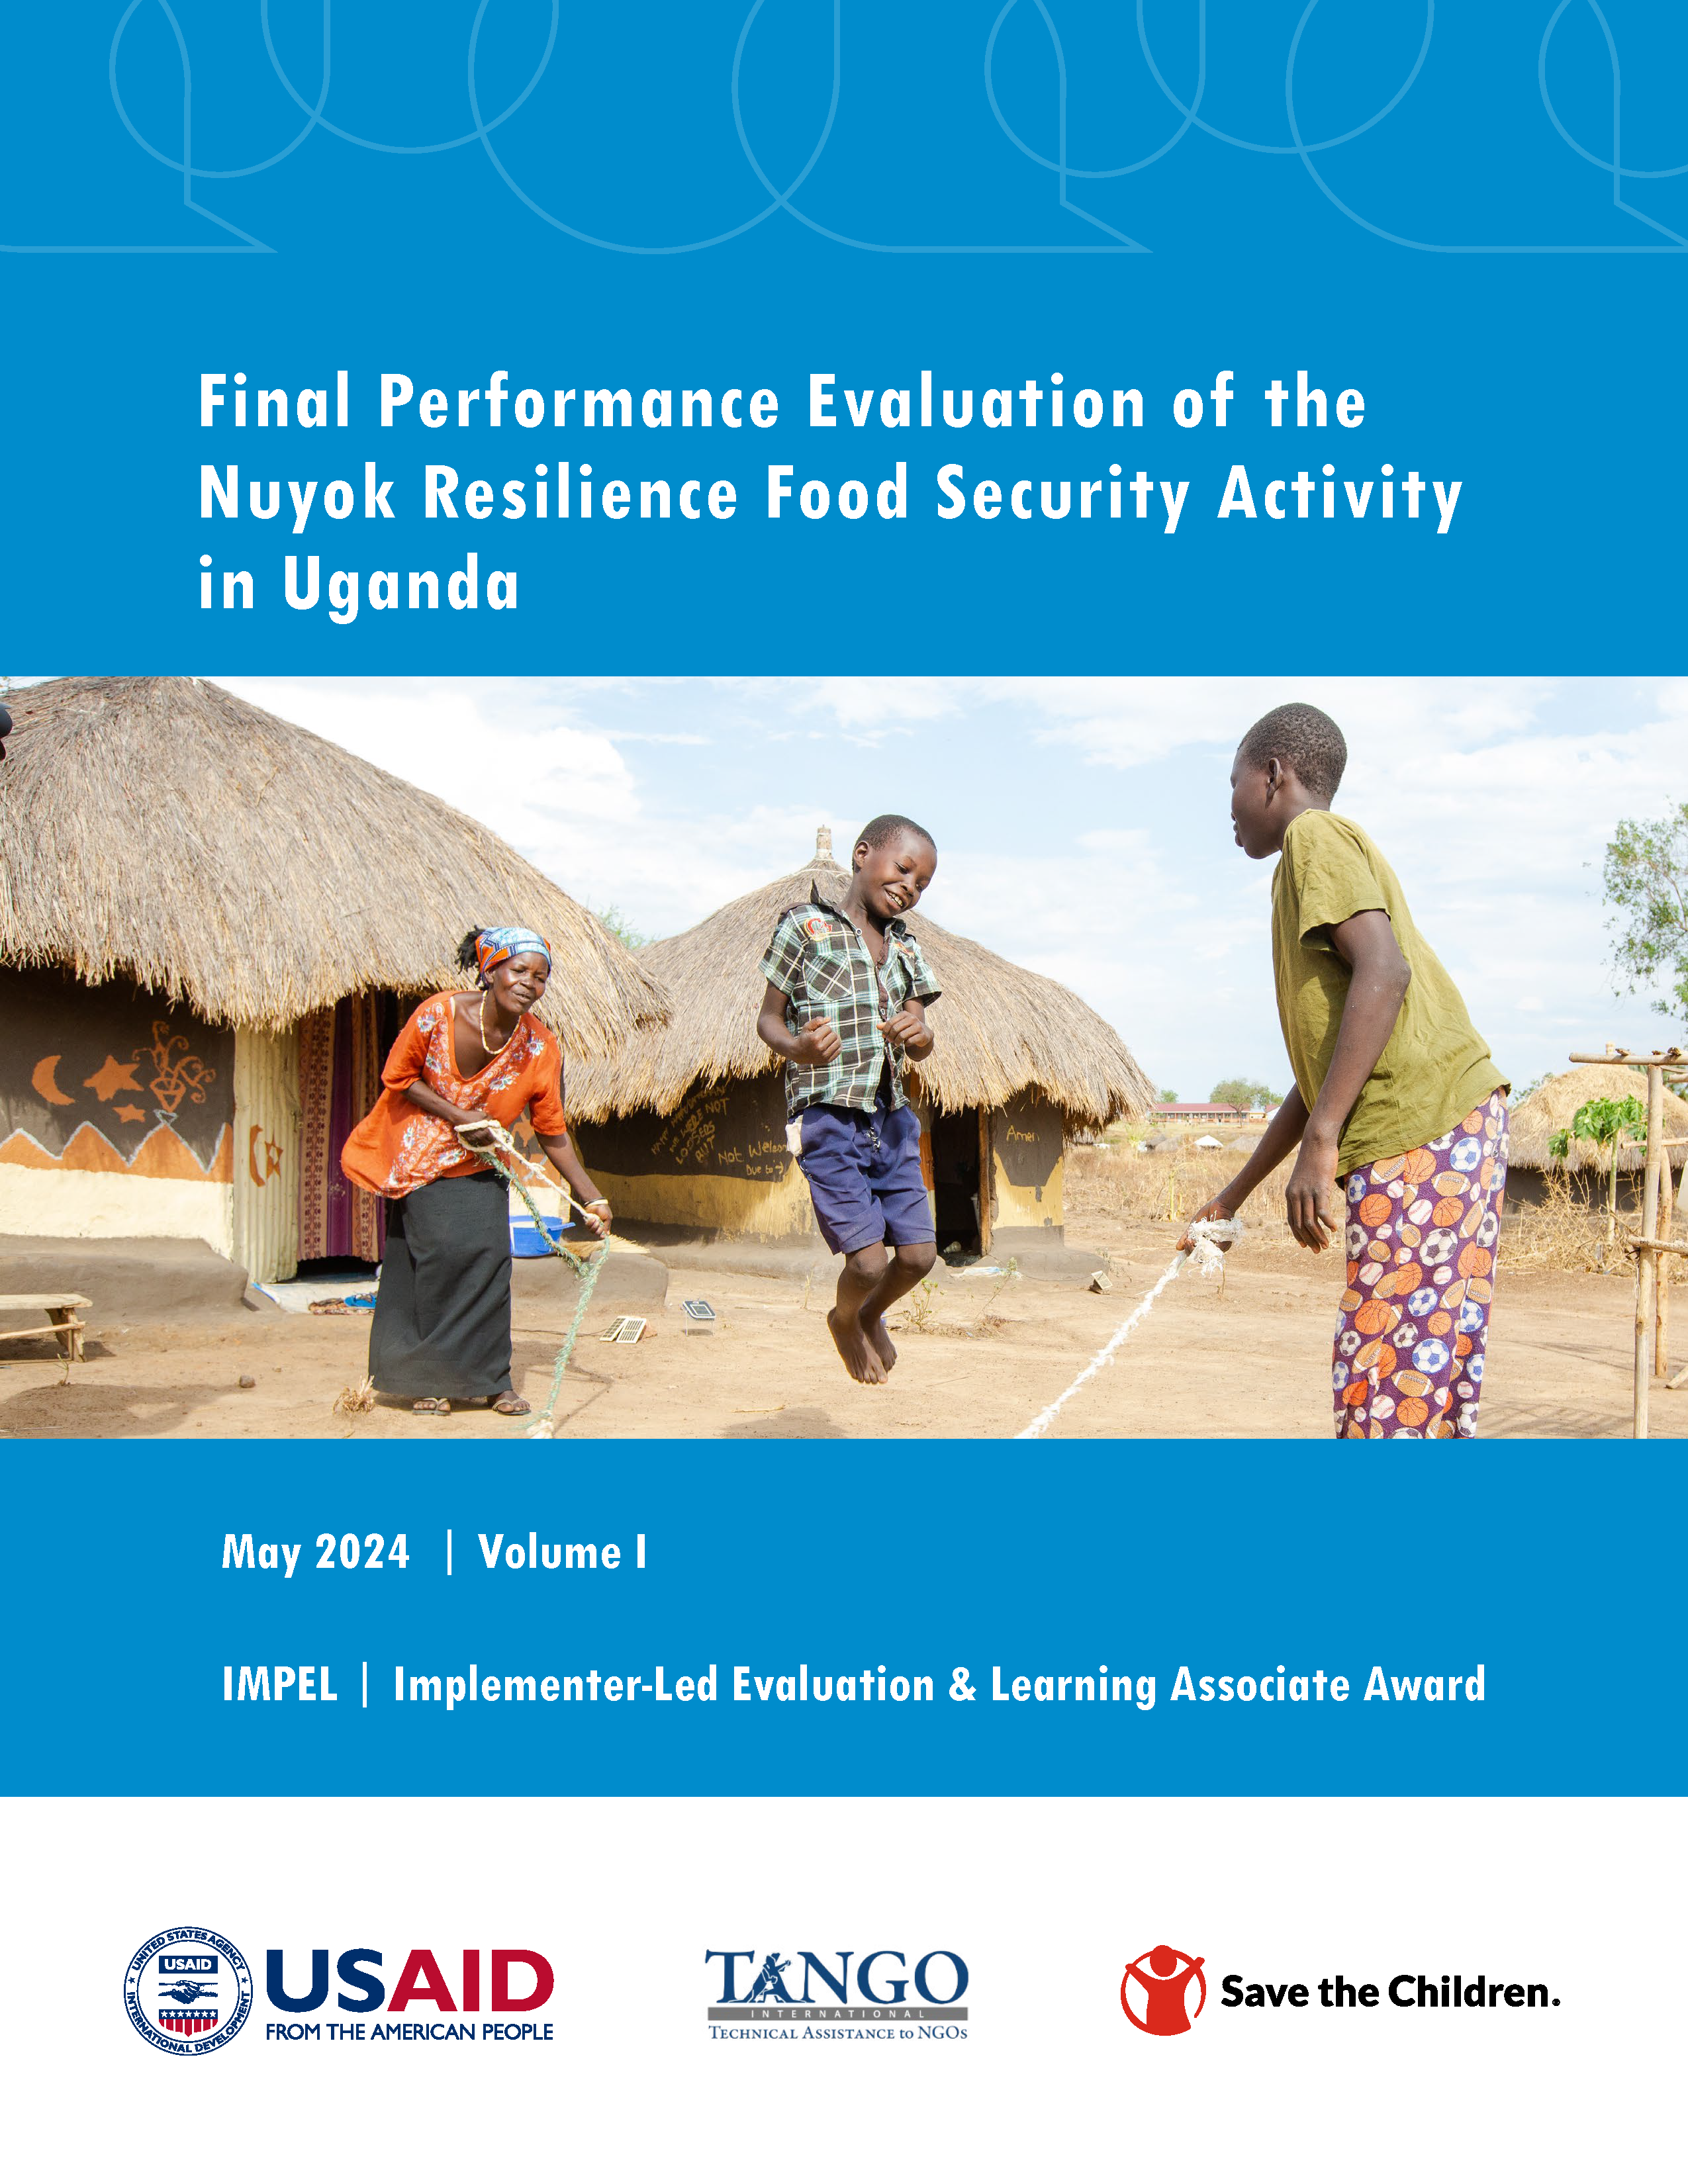 Cover of the Final Performance Evaluation of the Nuyok RFSA in Uganda